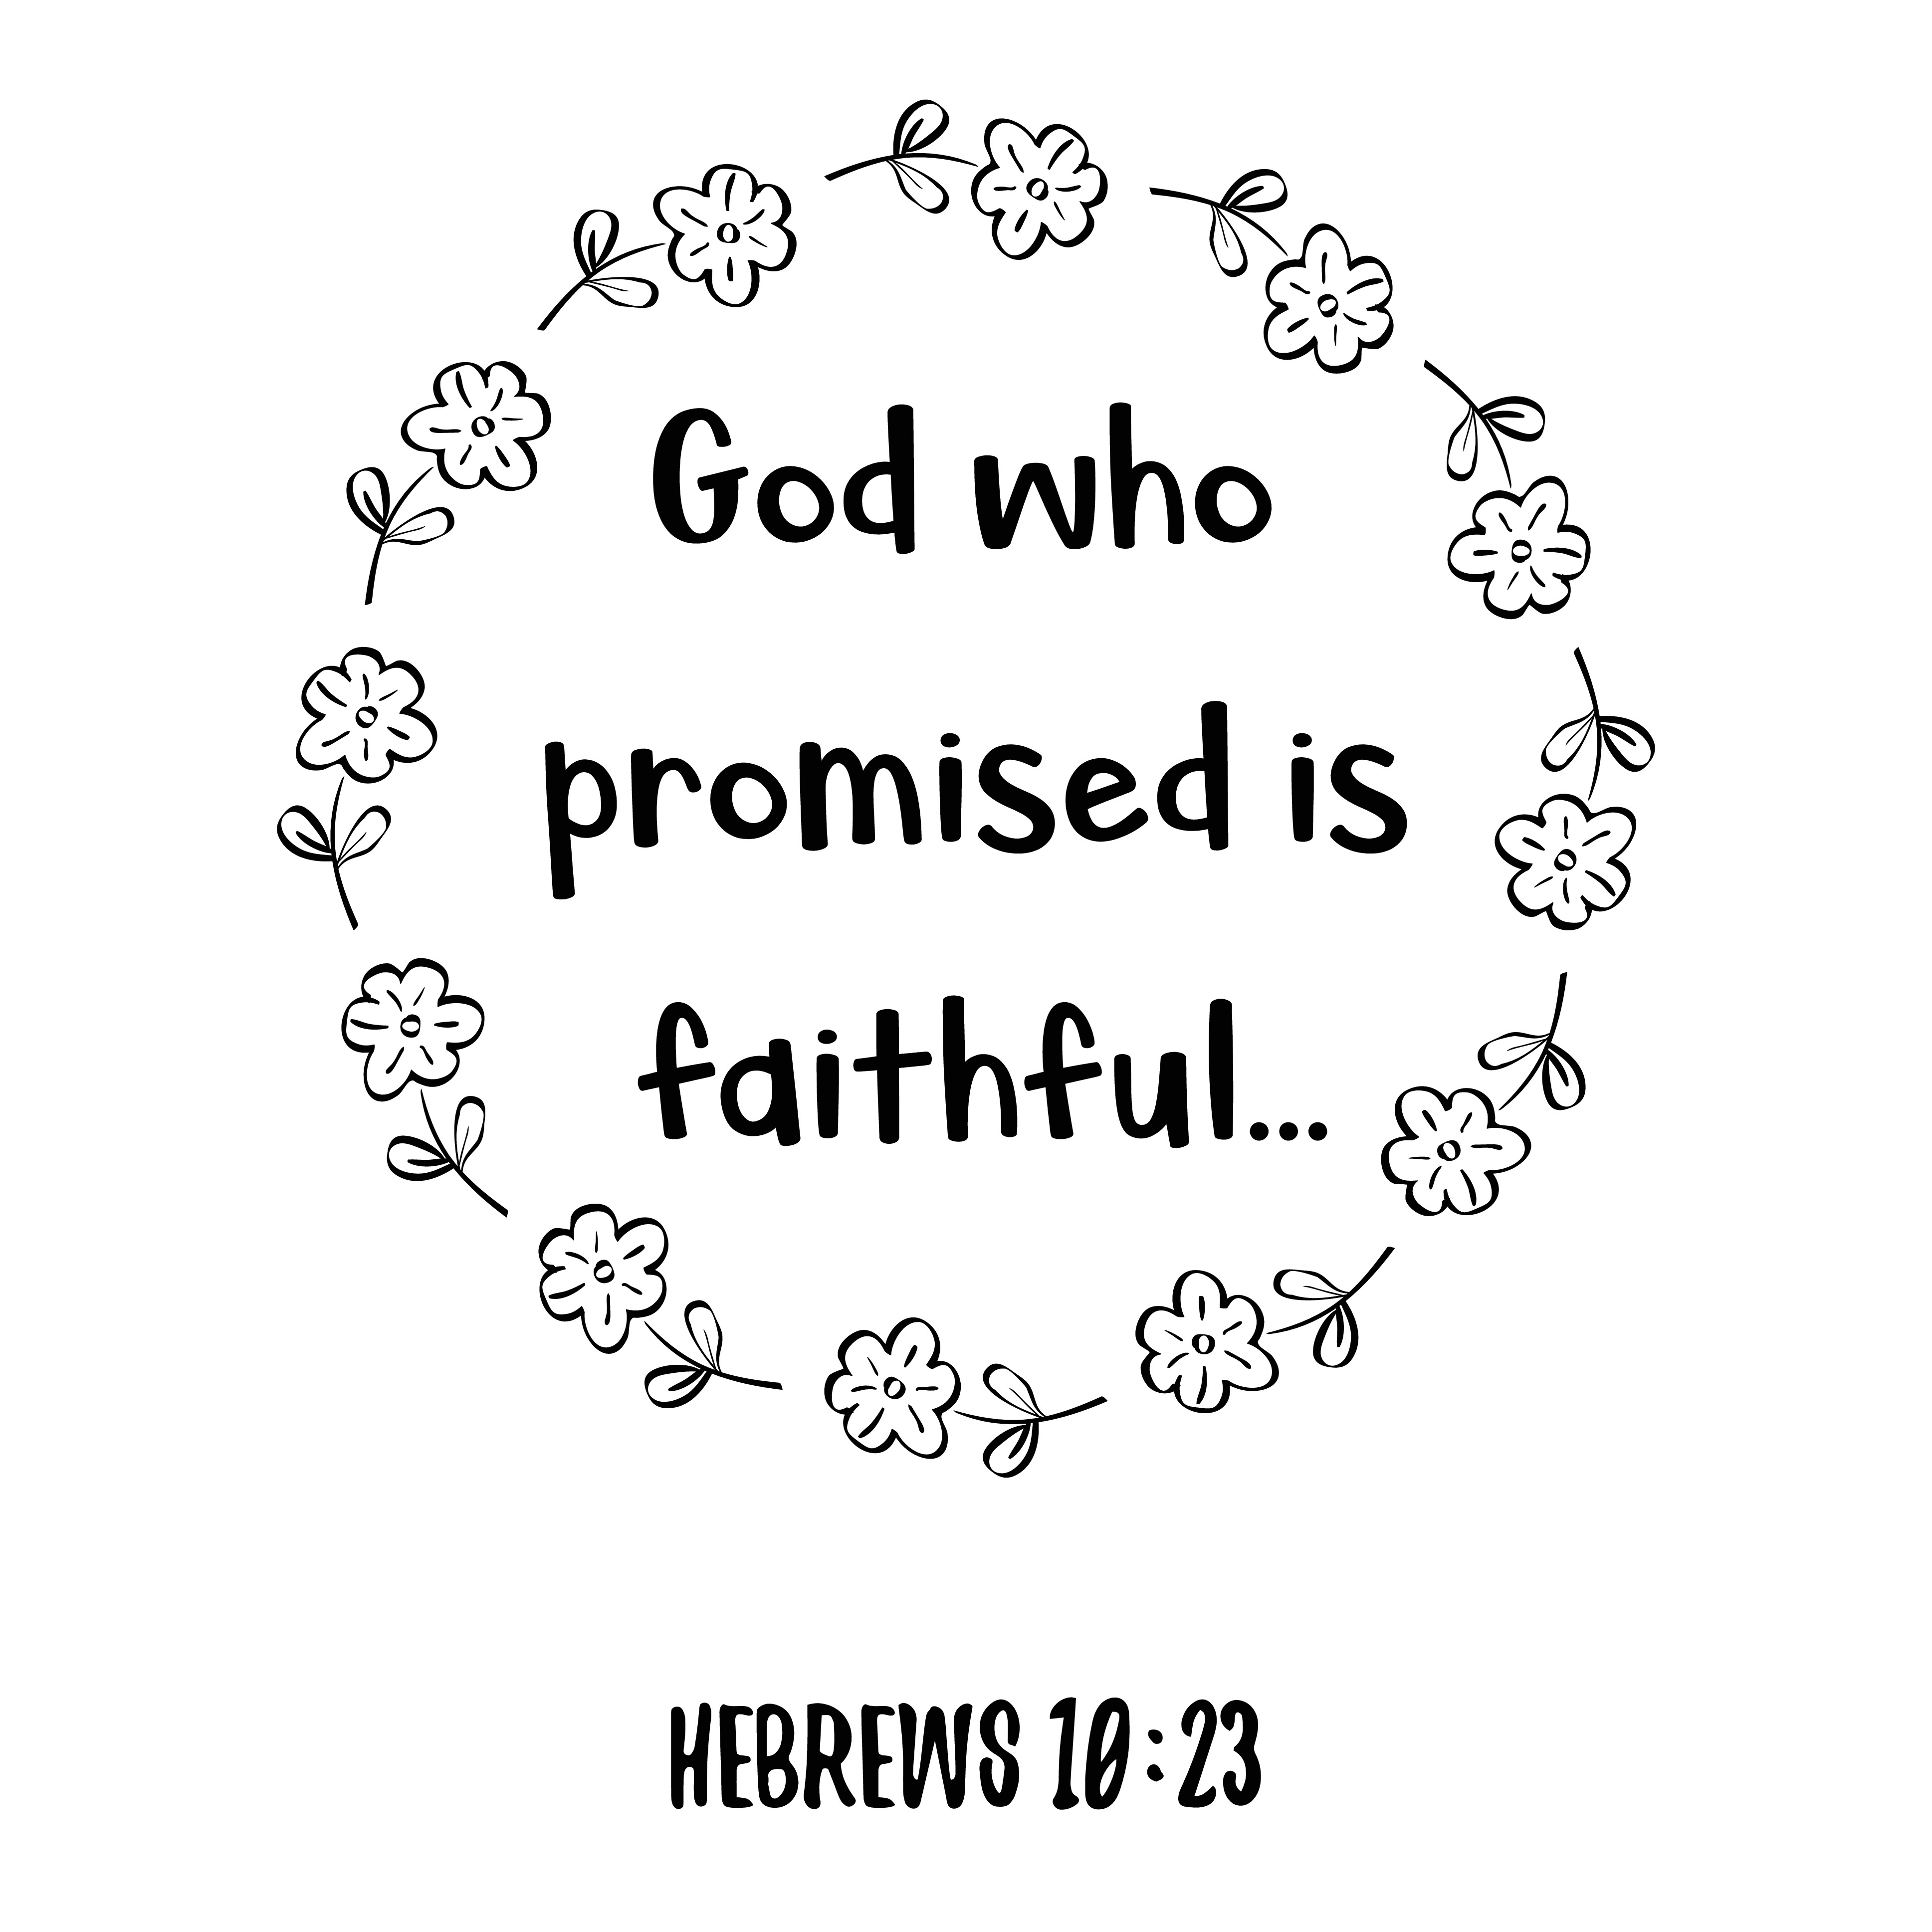 Hebrews 10:23 "God who promised is faithful..." written inside a floral circle drawing. 